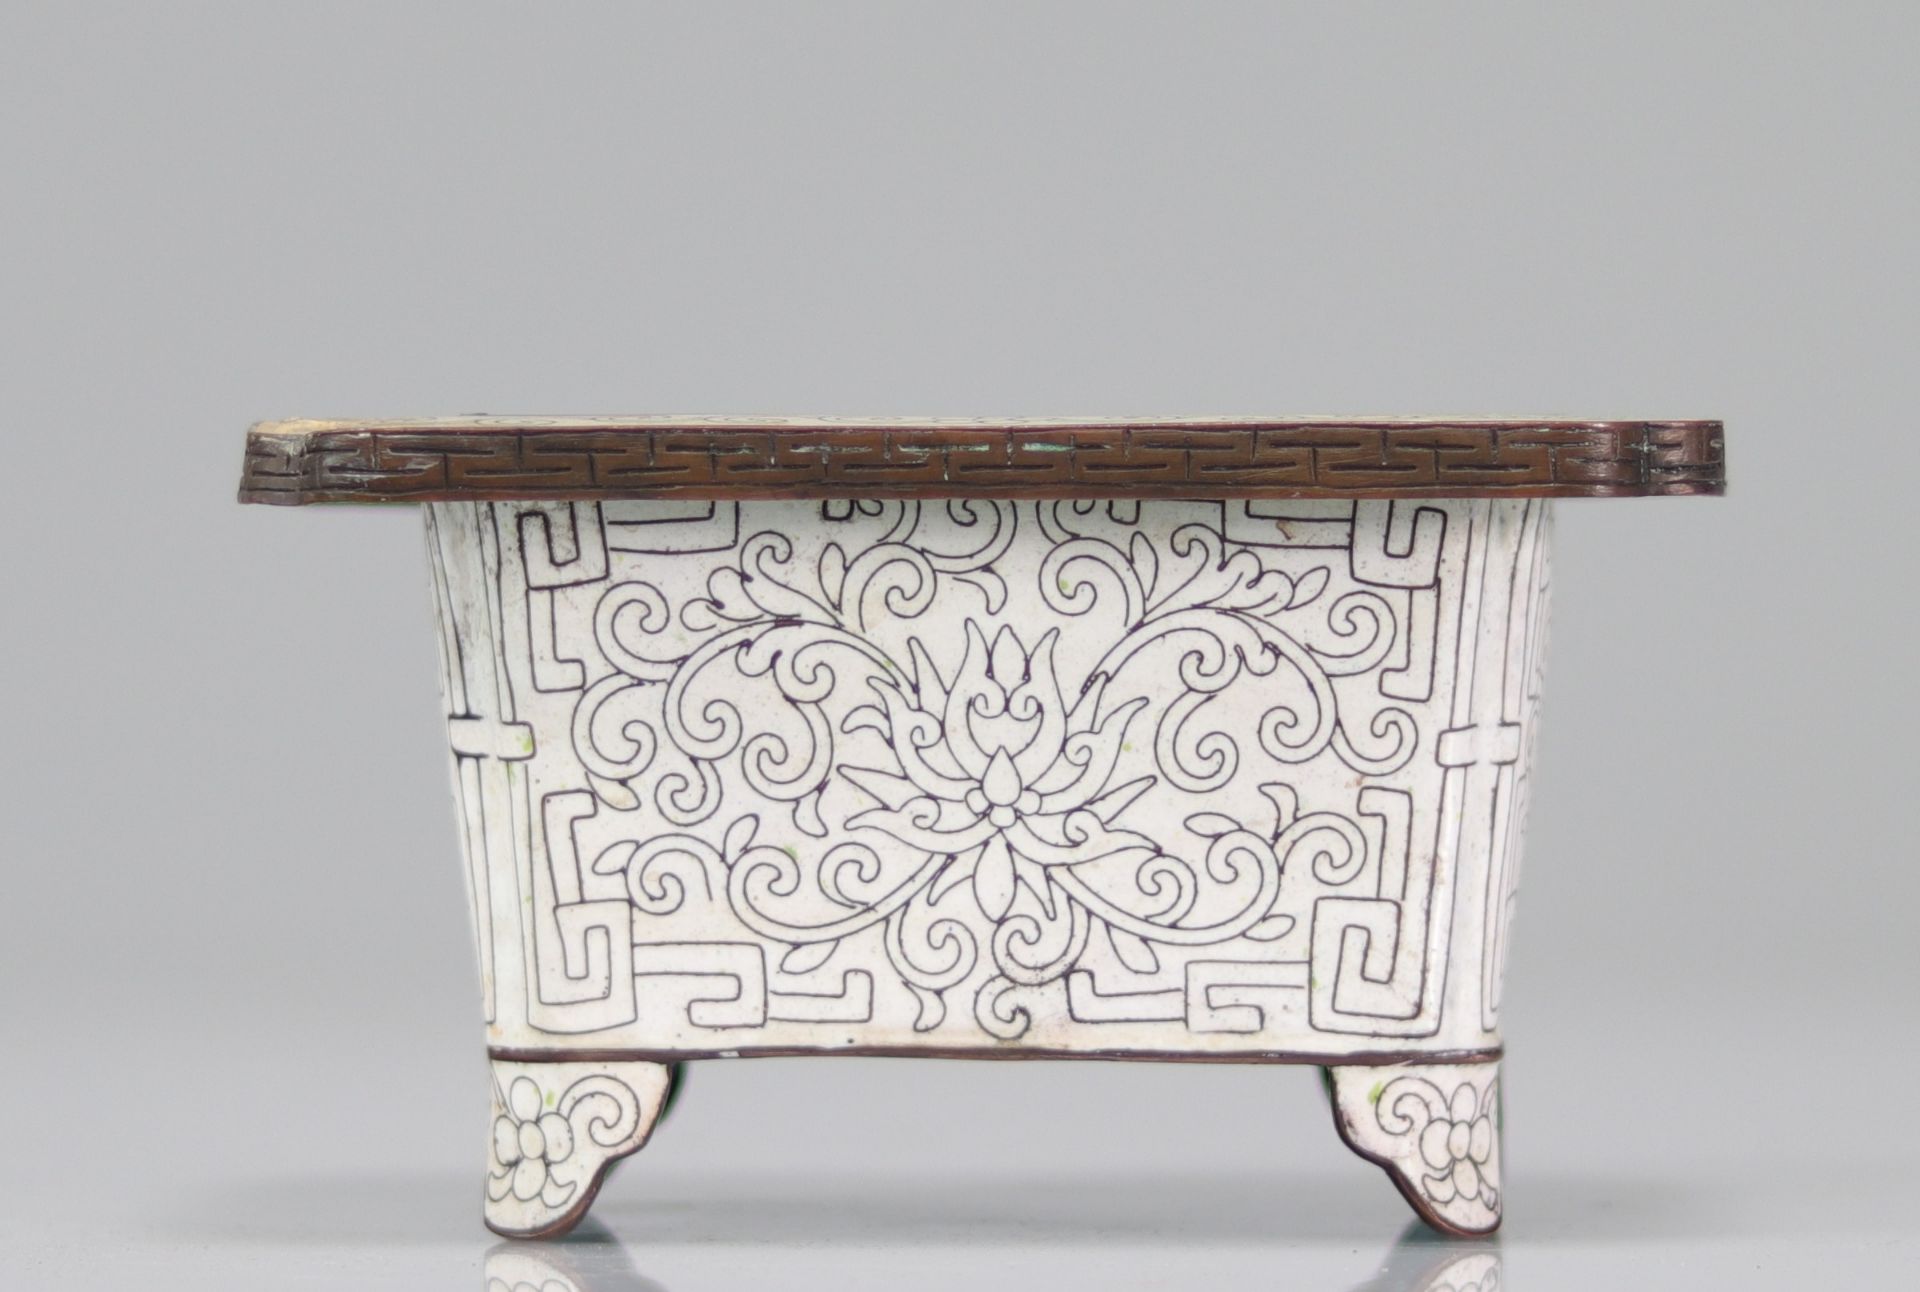 White Cloisonne Chinese Planter. Qing period